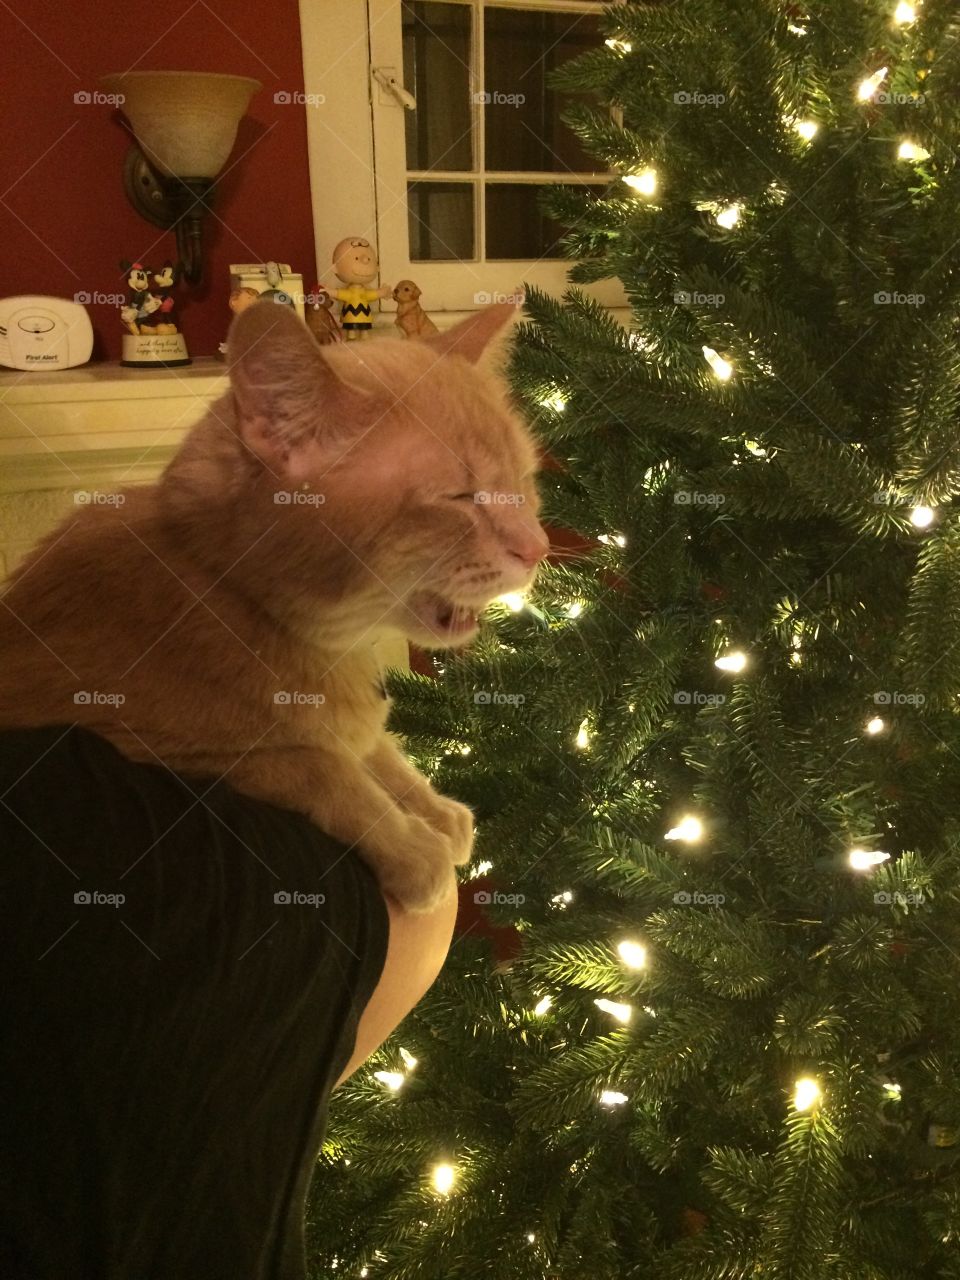 Talking to the Christmas tree